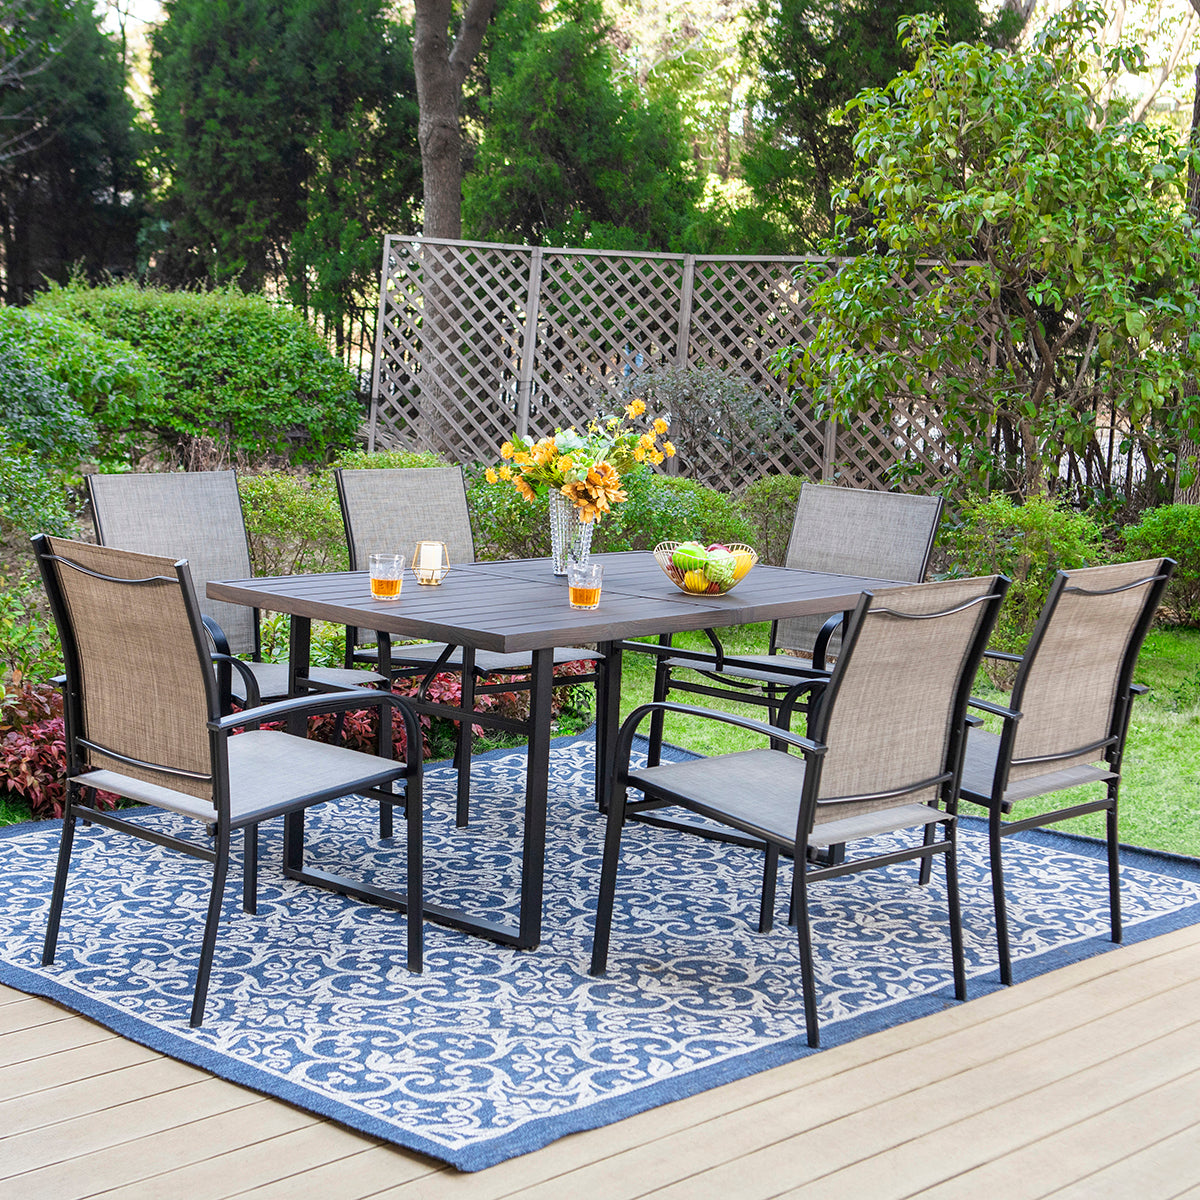 Sophia & William 7-Piece Patio Dining Set Printed Wood-grain Table & Light Textilene Fixed Chairs